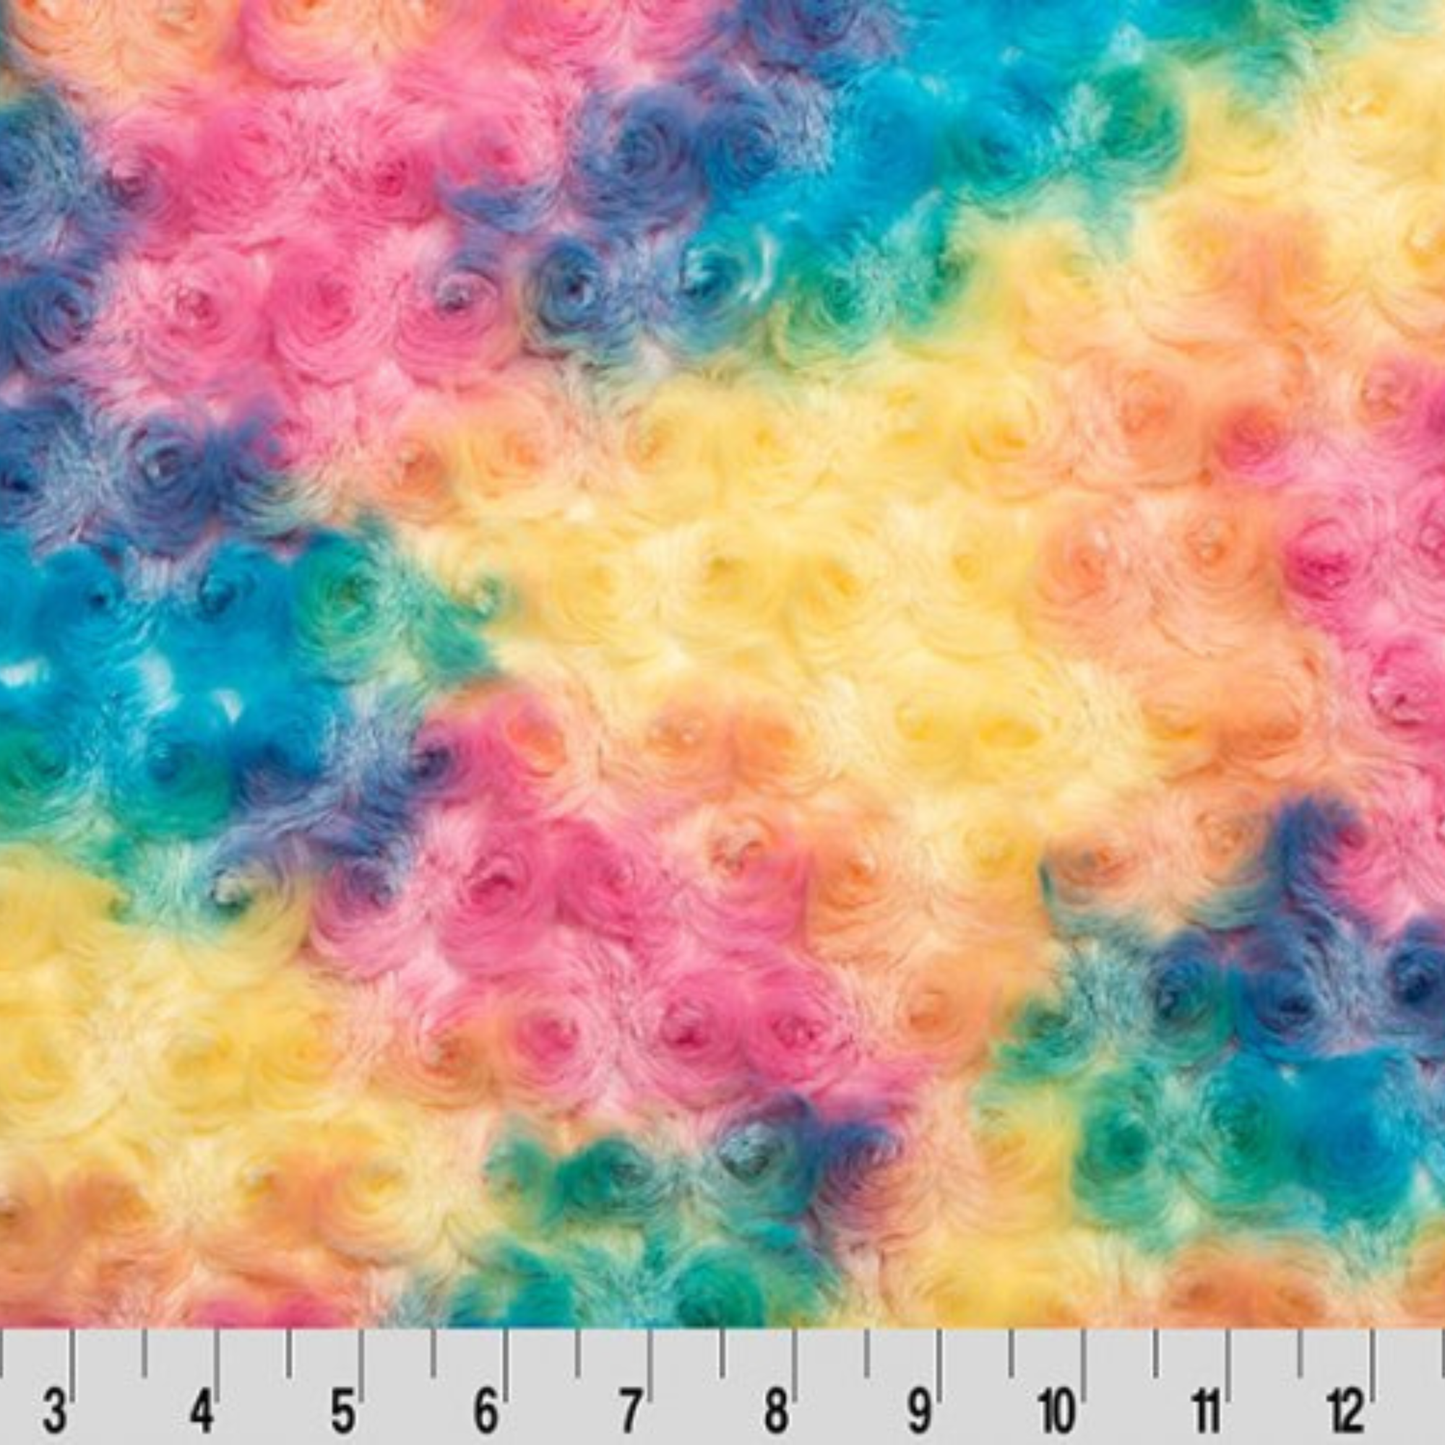 Shannon Fabrics Fabric 1 yard (36"x60") / Sorbet Luxe Cuddle® Rainbow Rose Cuddle® Minky in Cotton Candy, Sorbet or Vibrant